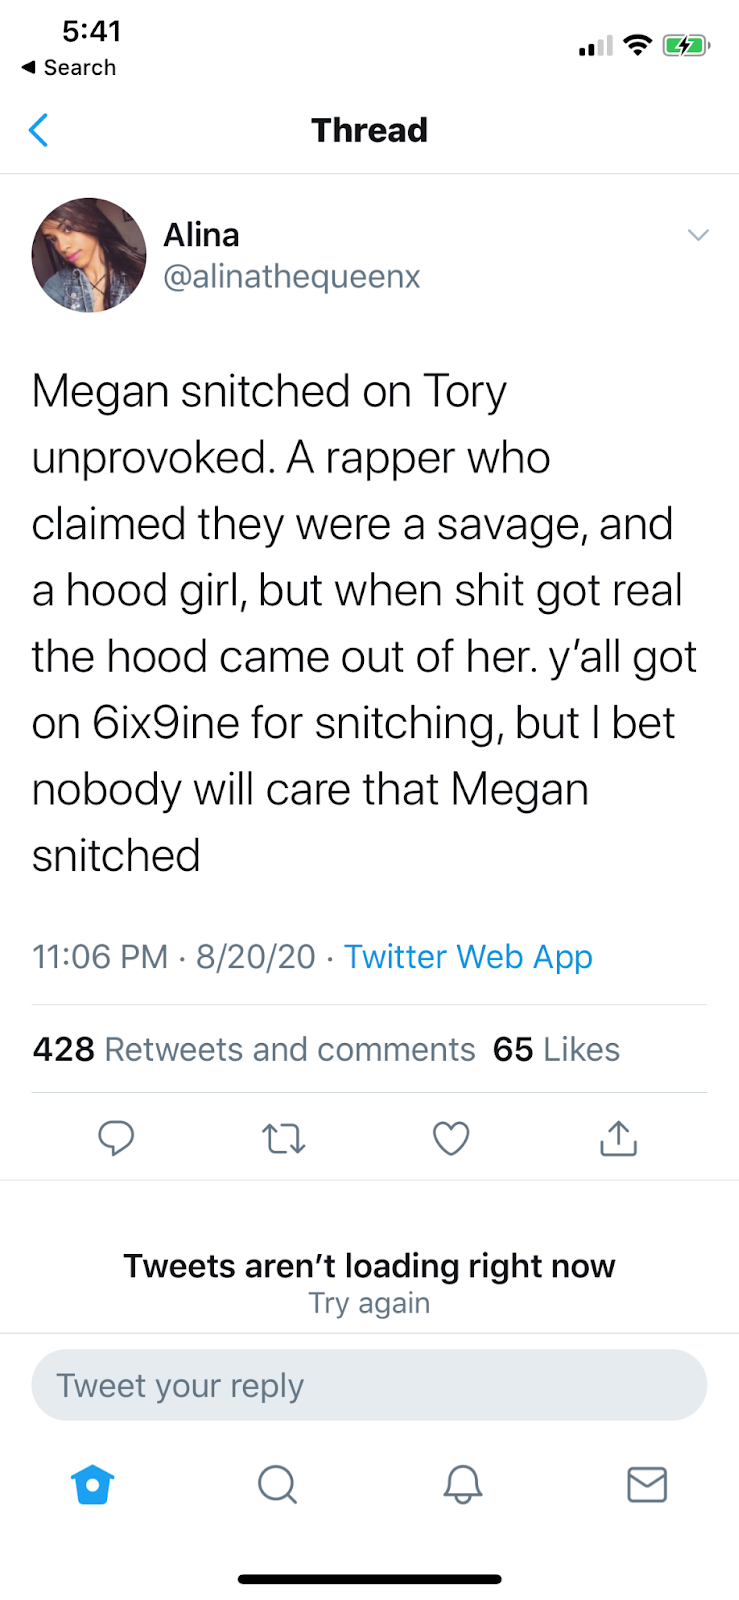 A screenshot of a tweet that says “Megan snitched on Tory unprovoked. A rapper who claimed they were a savage, and a hood girl, but when shit got real the hood came out of her. y’all got on 6ix9ine for snitching, but I bet nobody will care that Megan snitched.”